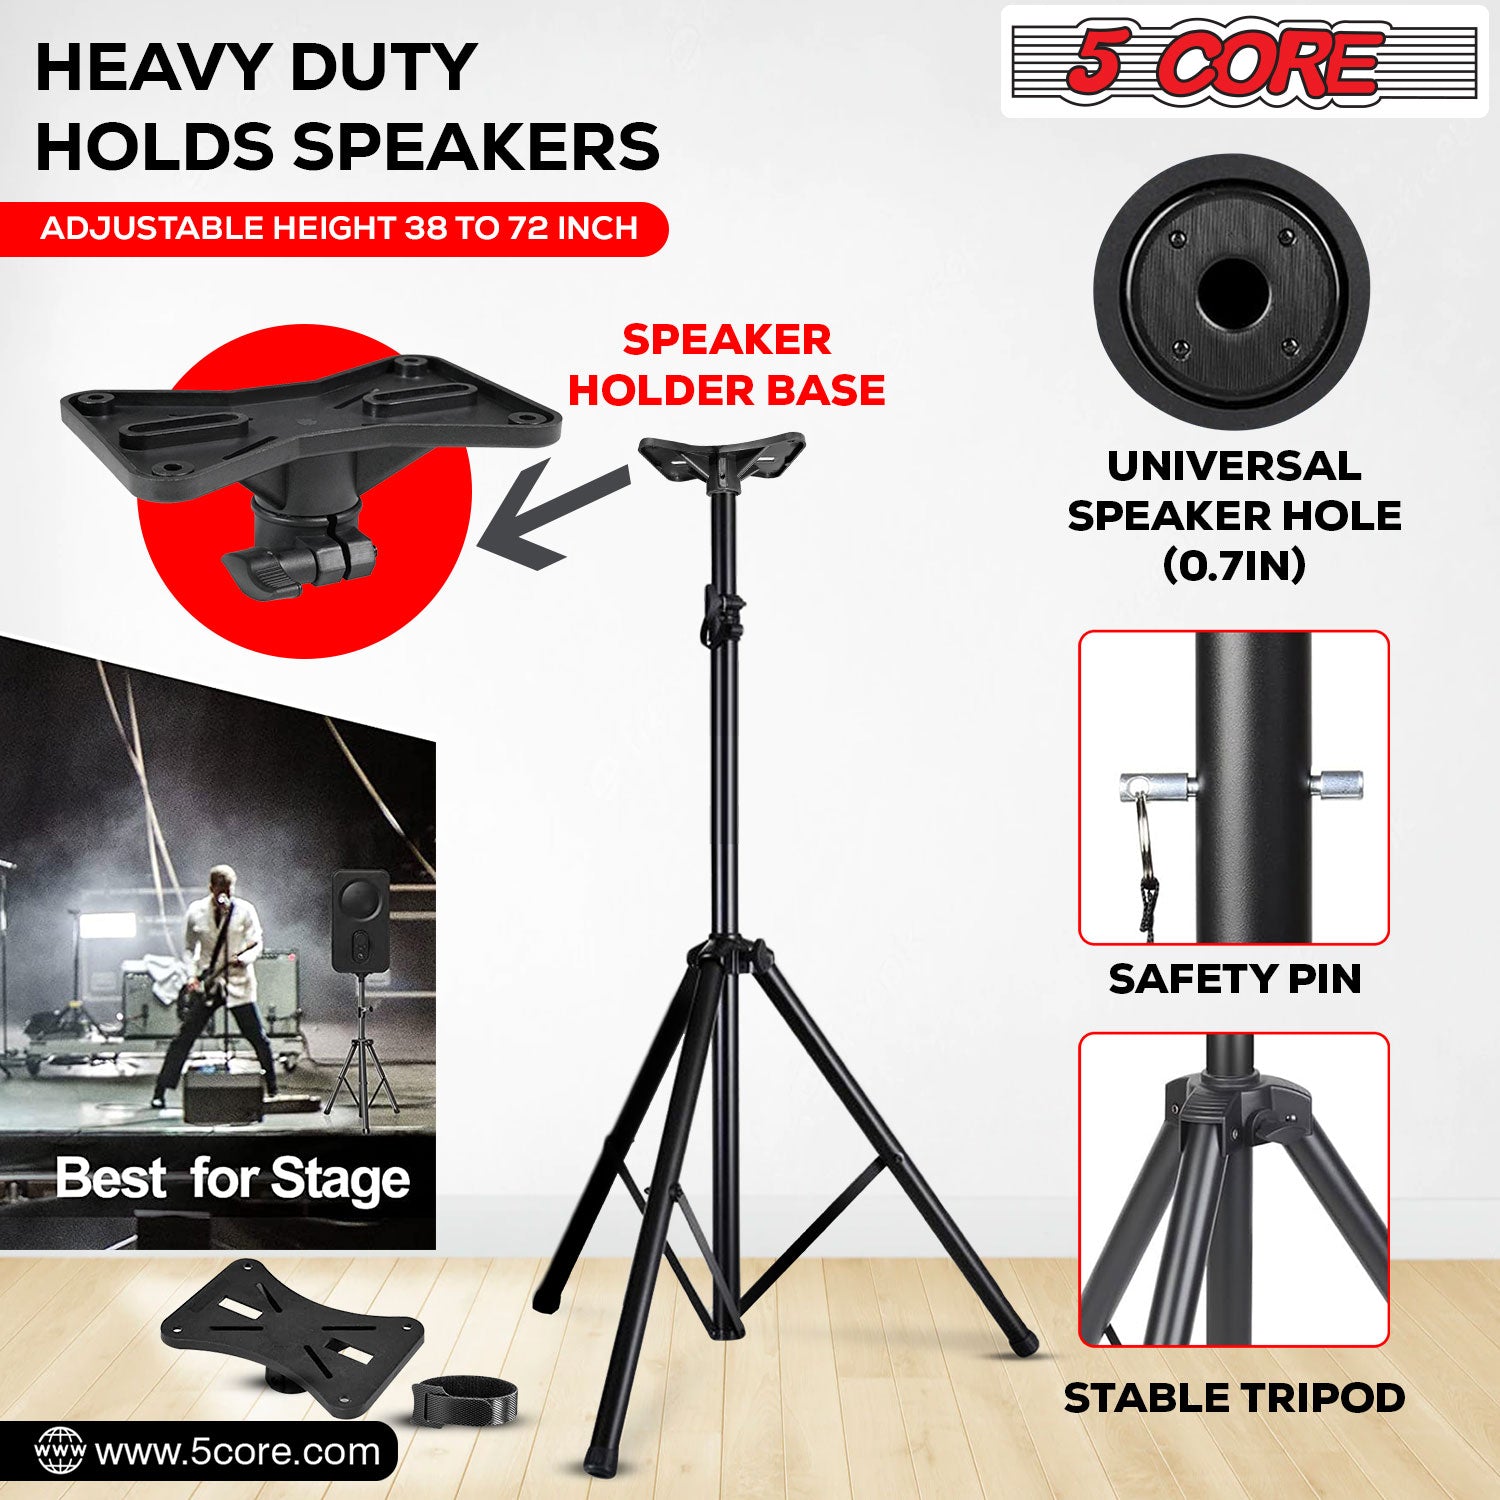 Heavy Duty Speaker Stands, Can Holds up to 100 lbs.